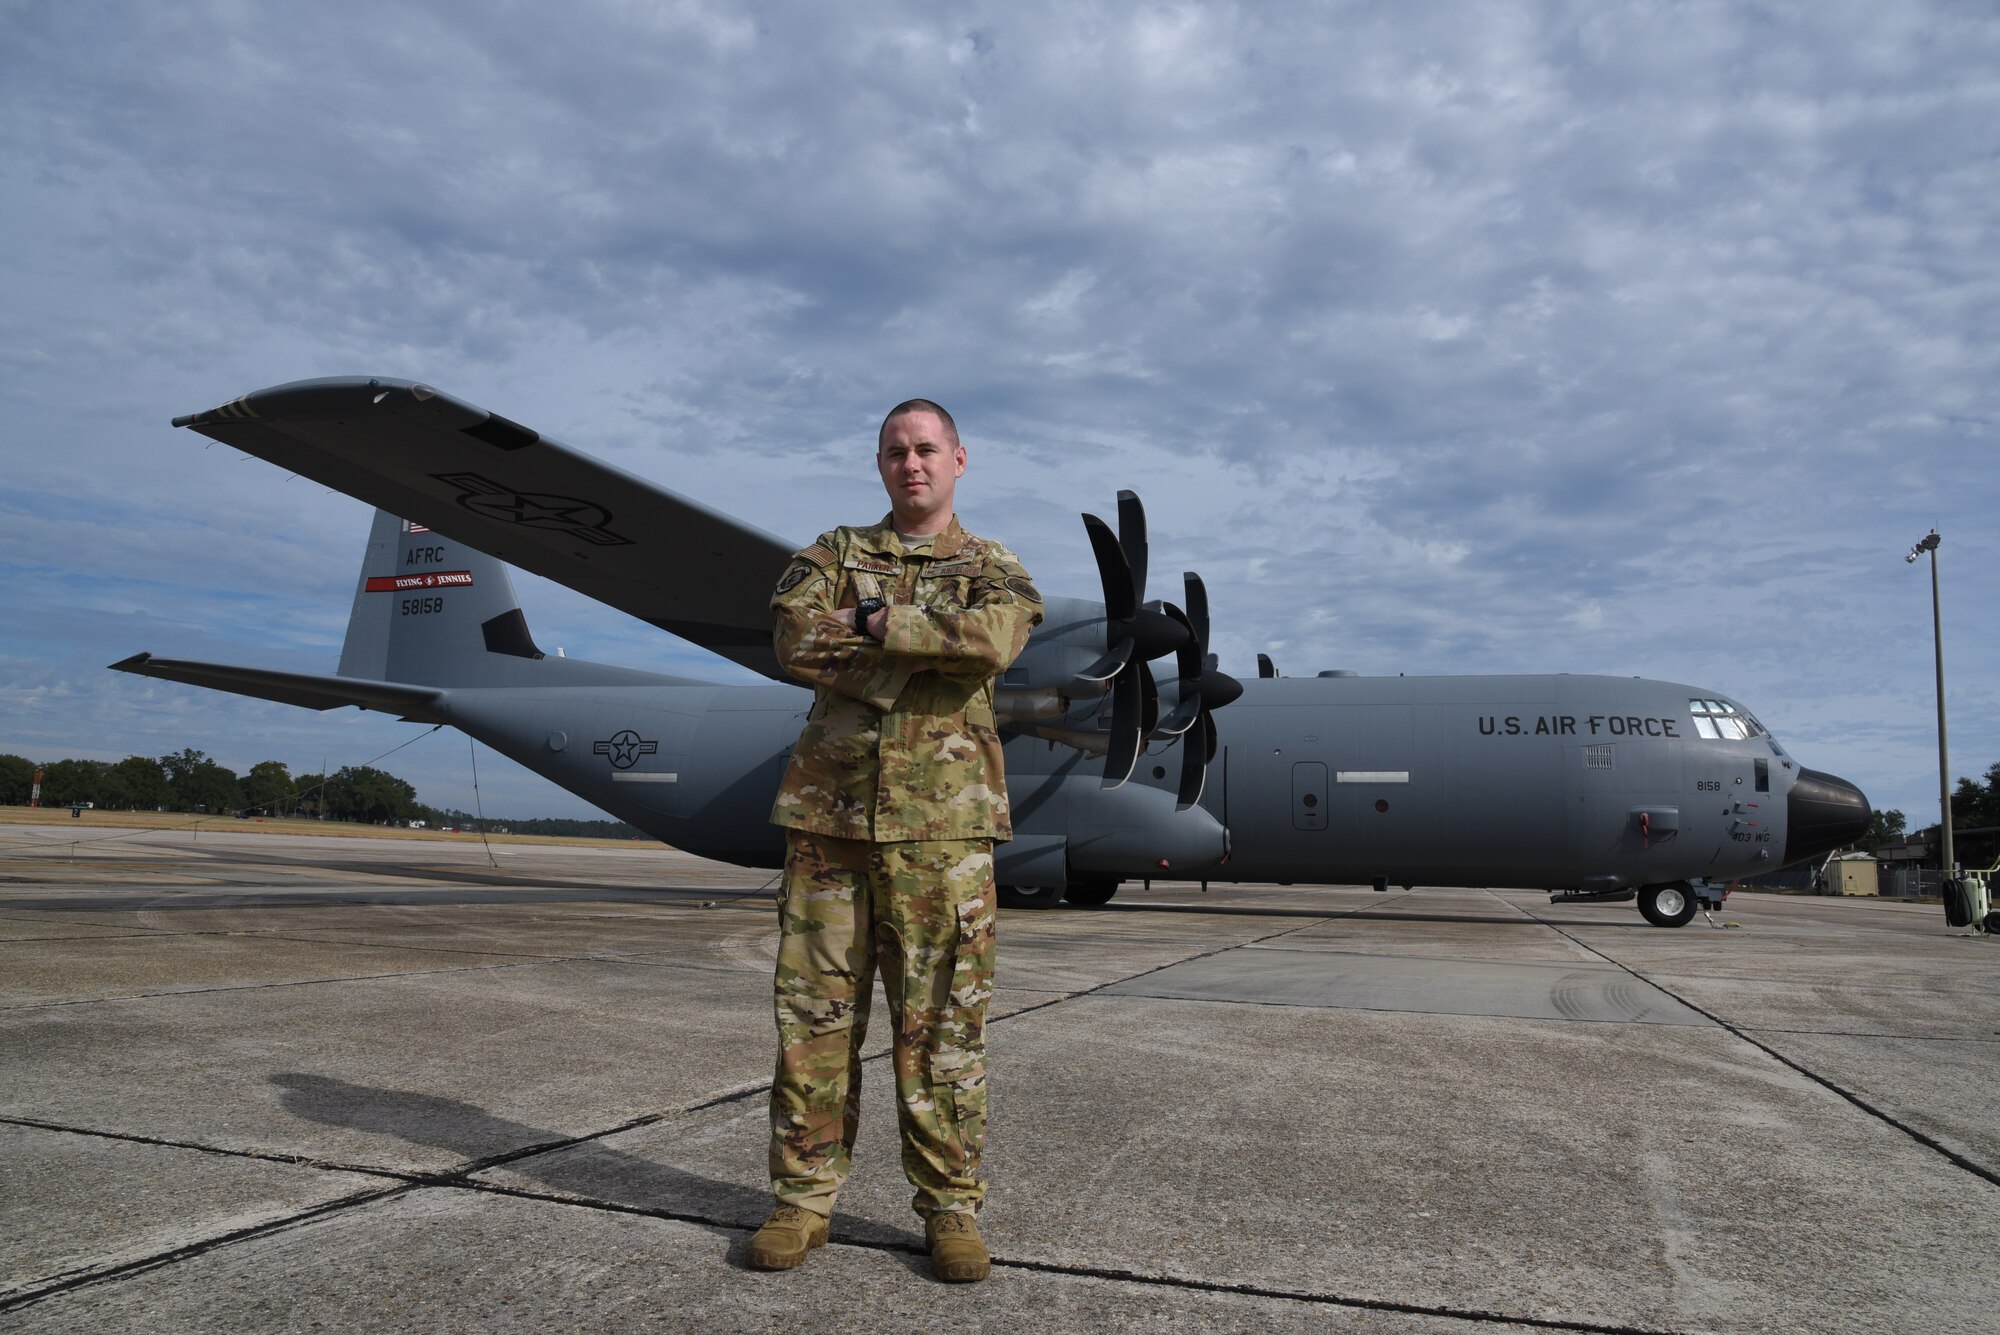 Tech. Sgt. Jonathan Parker, 815th Airlift Squadron instructor loadmaster, poses with an 815th AS, Flying Jennies, C-130J Super Hercules at Keesler Air Force Base, Miss. (U.S. Air Force photo by Jessica L. Kendziorek)